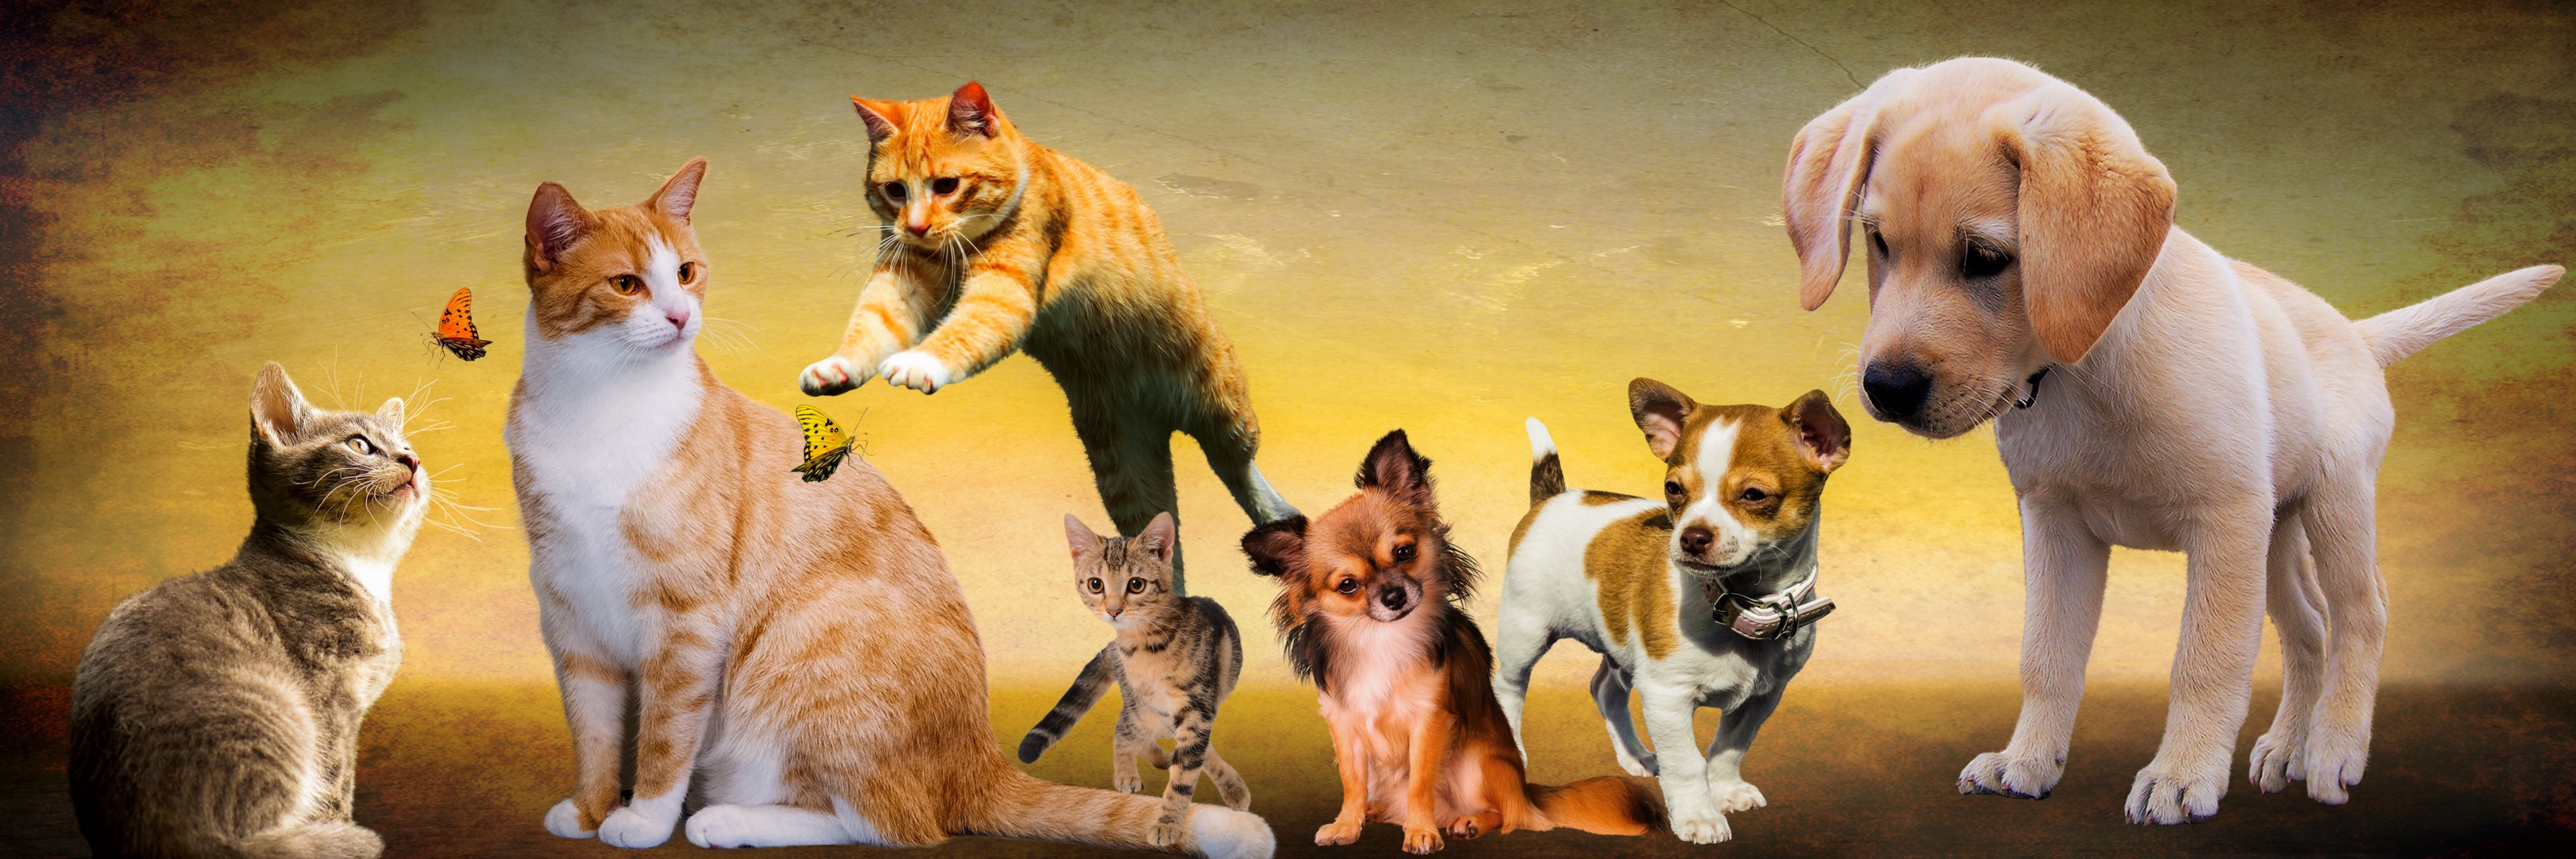 Wallpaper / animals dogs cat play young animals puppy jump 4k wallpaper free download